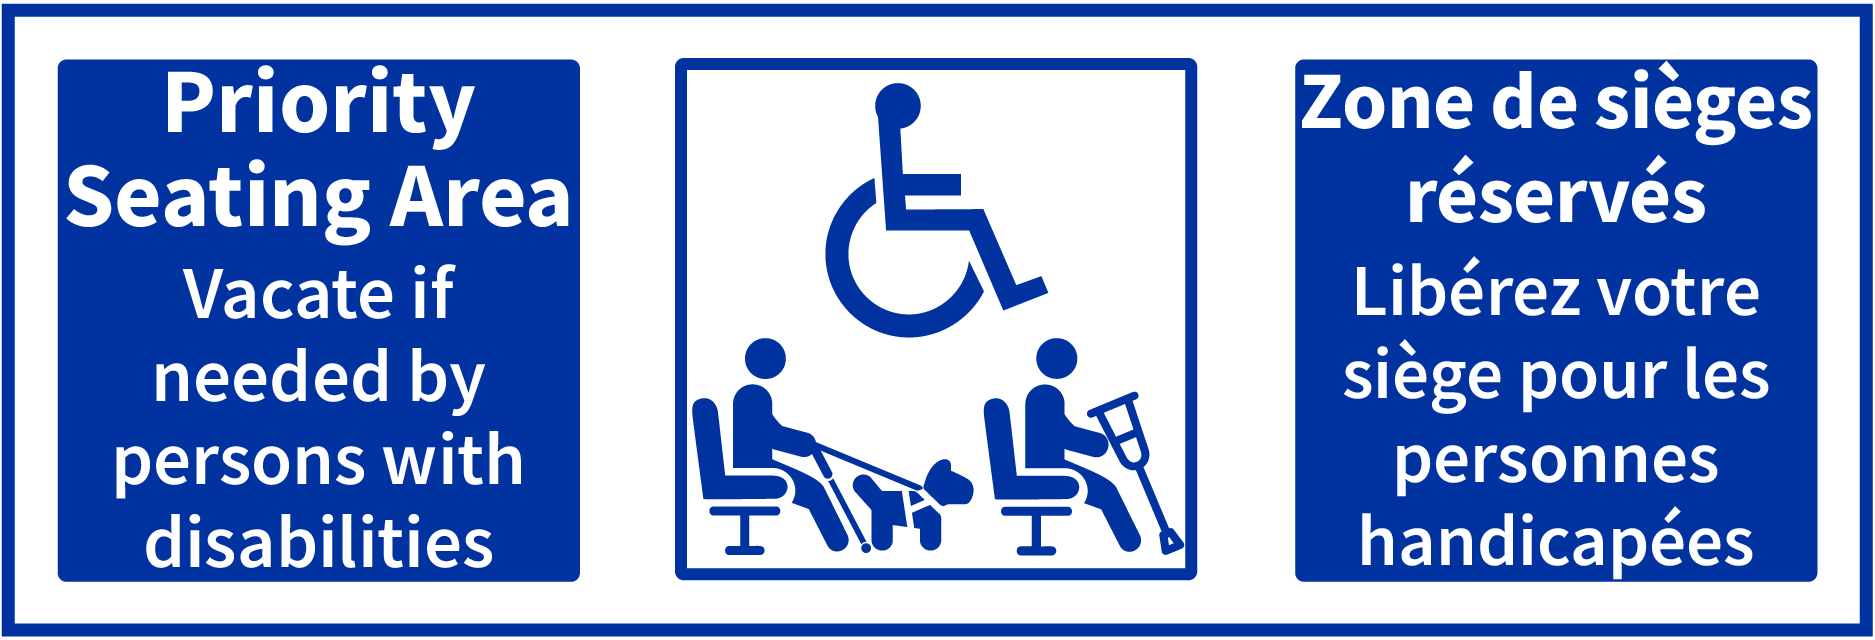 Icons of a wheelchair user, person sitting with cane and service dog and person with a crutch and text that reads Priority Seating Area - Vacate if needed by persons with disabilities